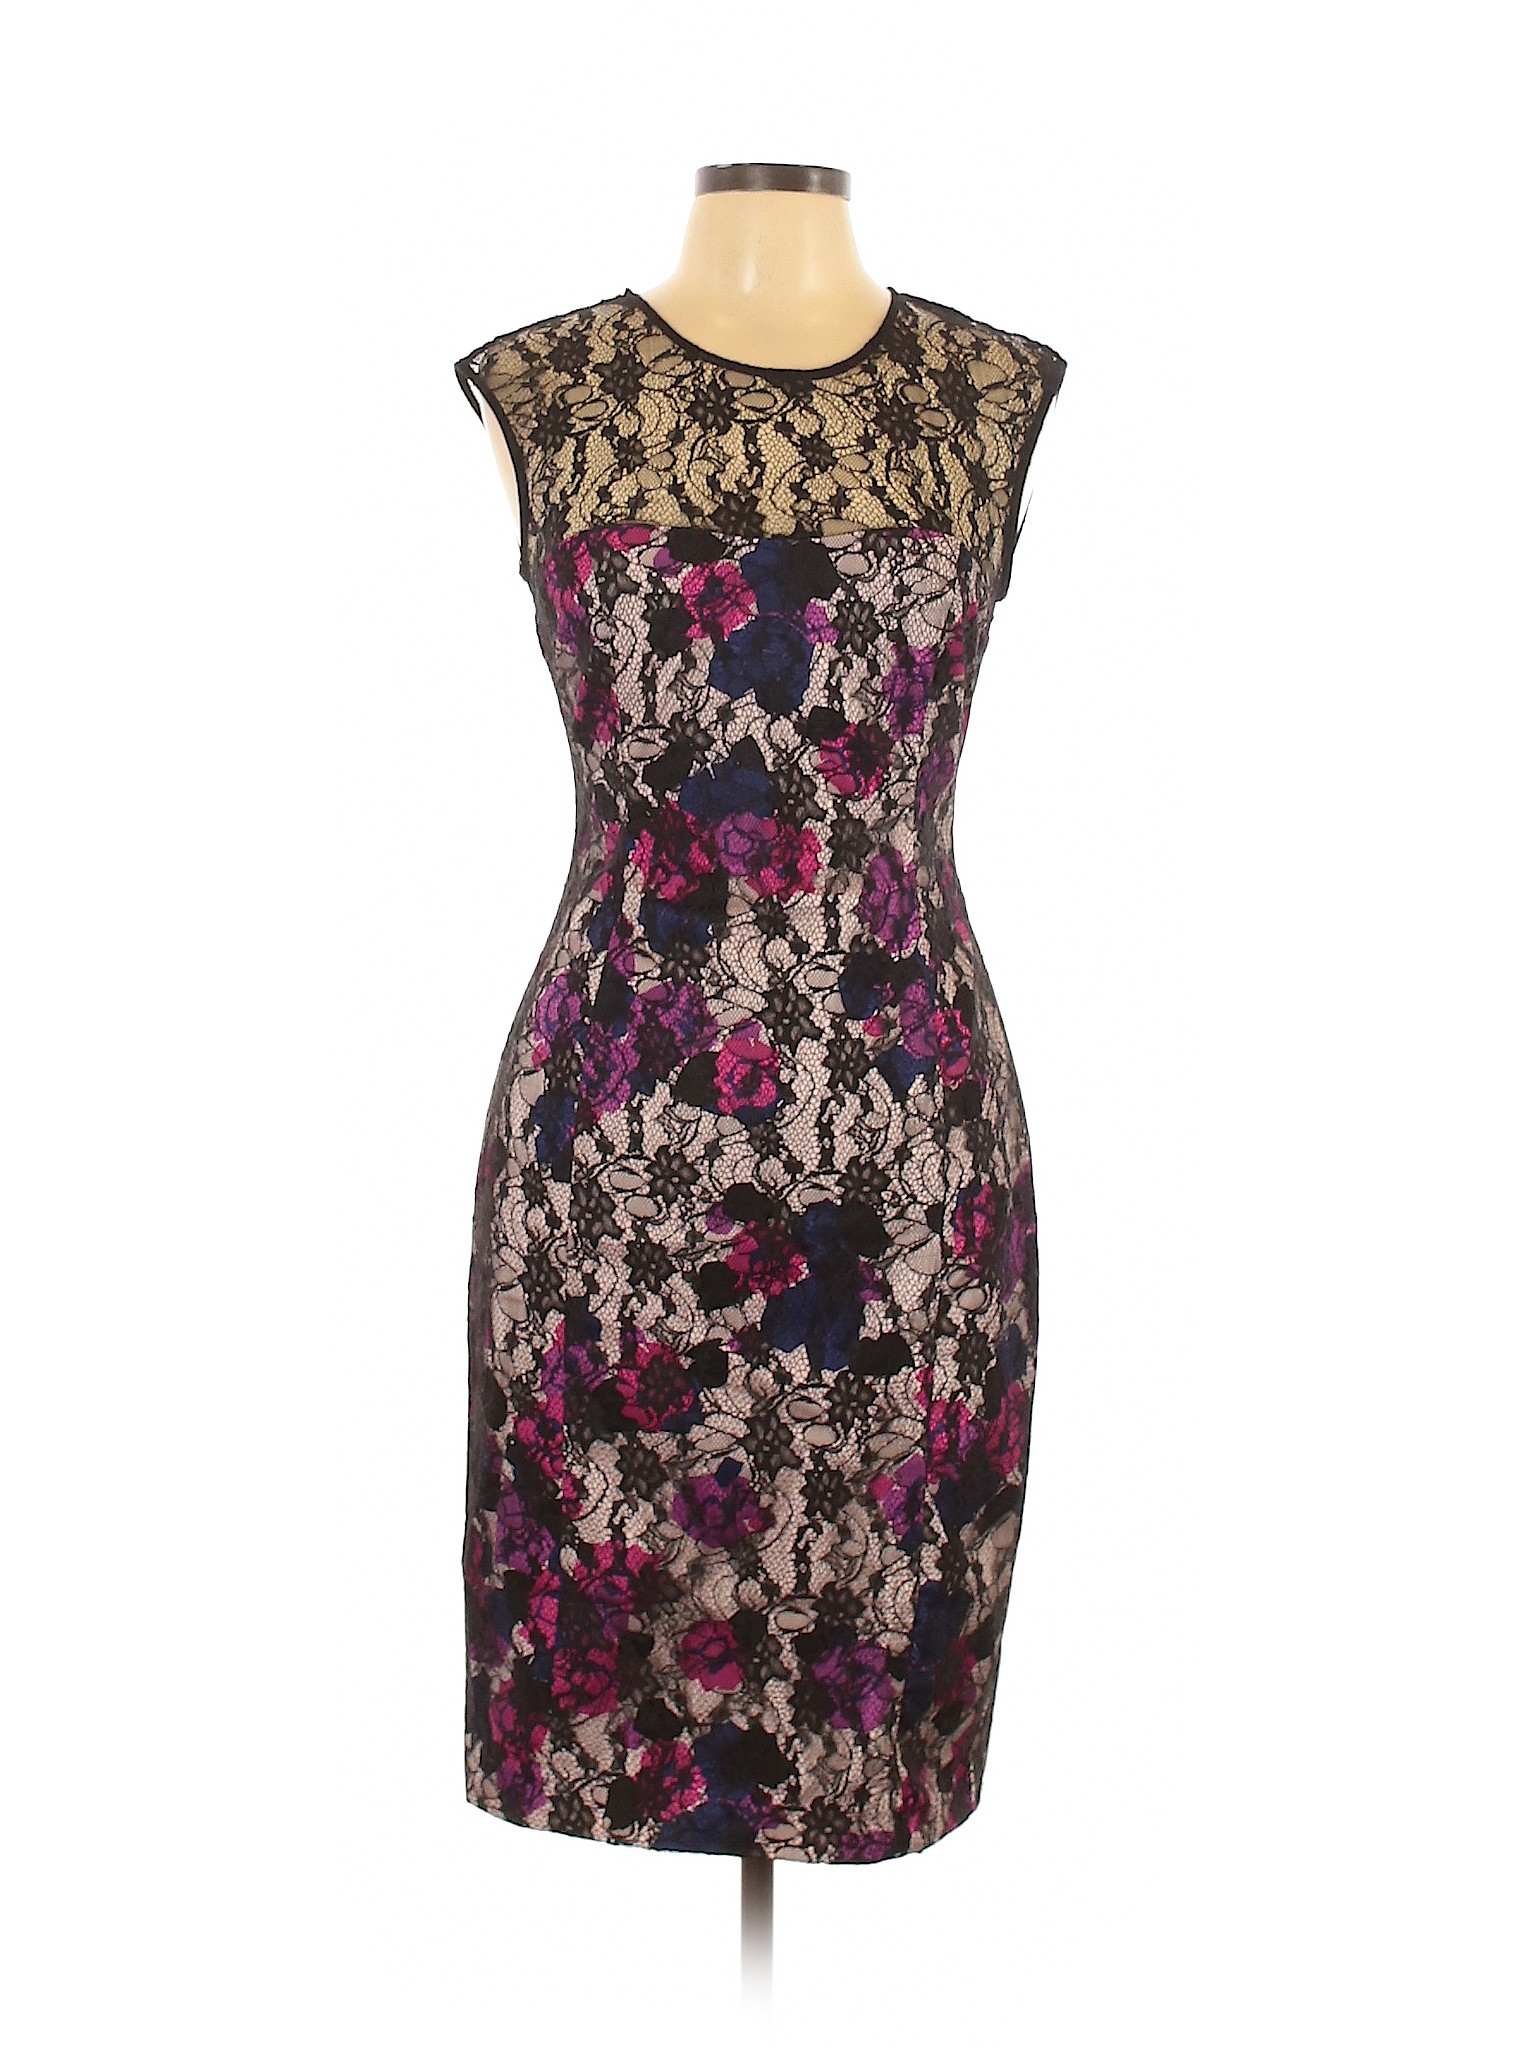 French Connection Women Purple Cocktail Dress 6 | eBay